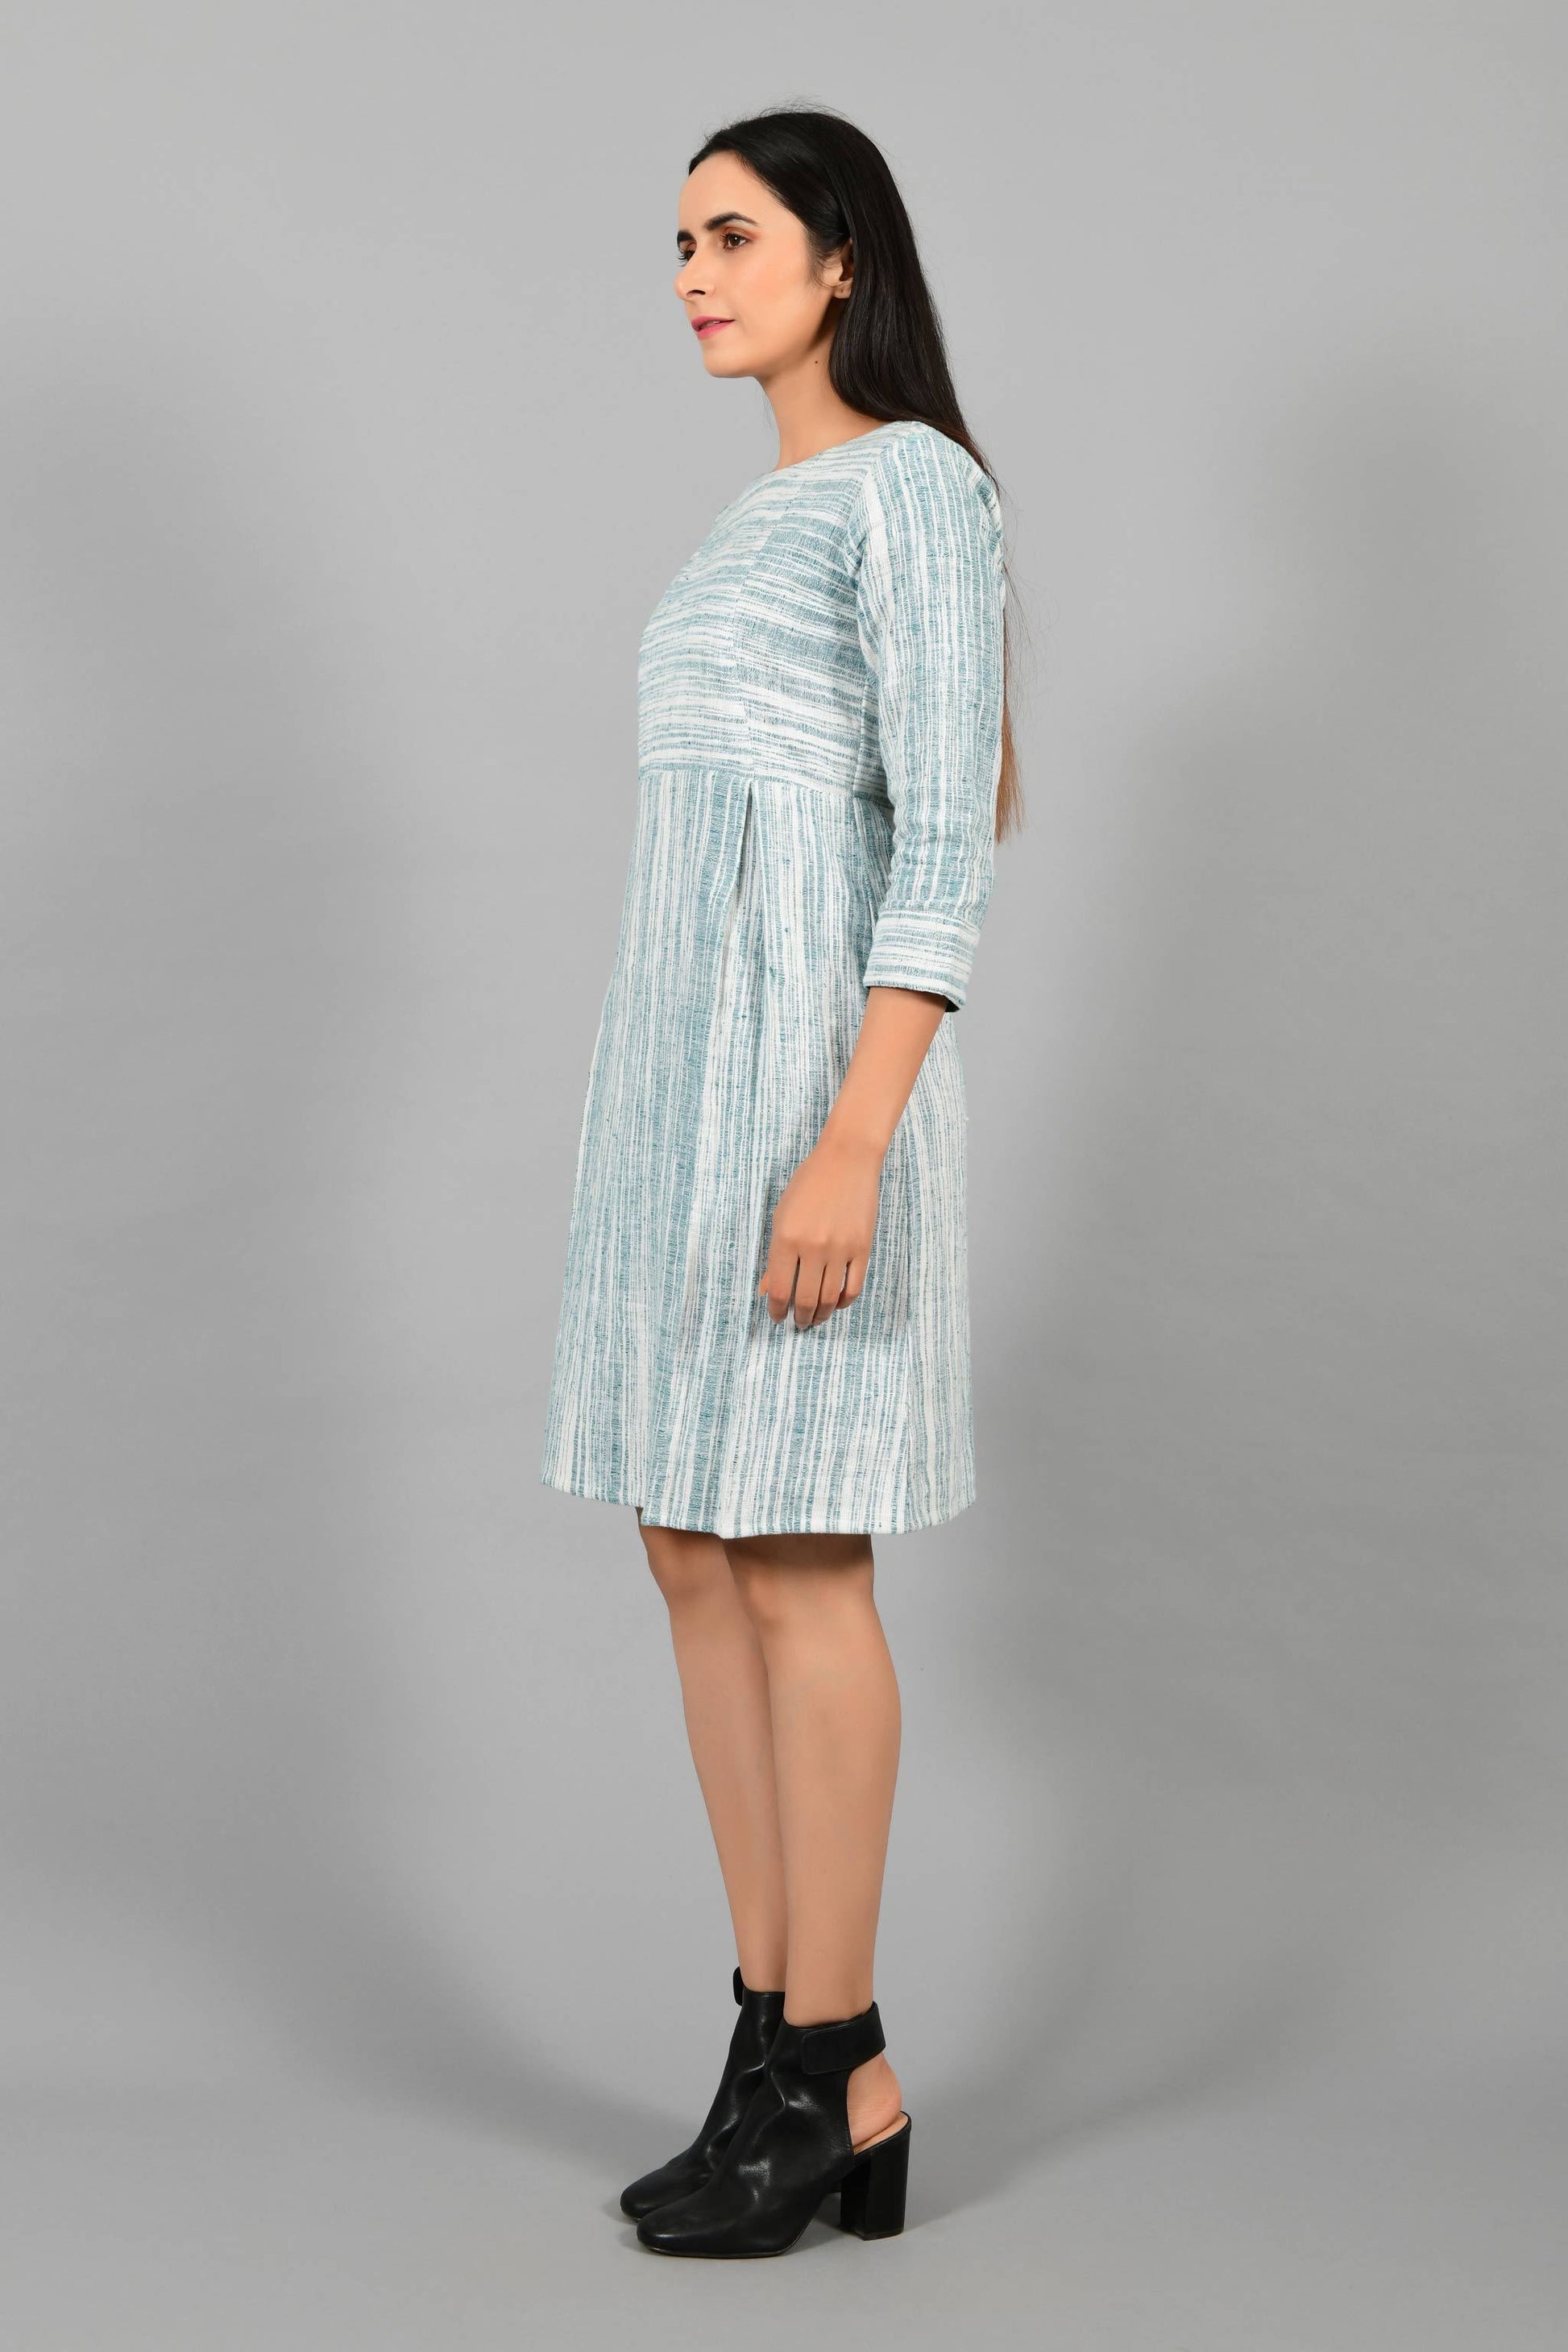 Side pose of an Indian Womenswear female model wearing pine green handspun and handwoven cotton dress by Cotton Rack.